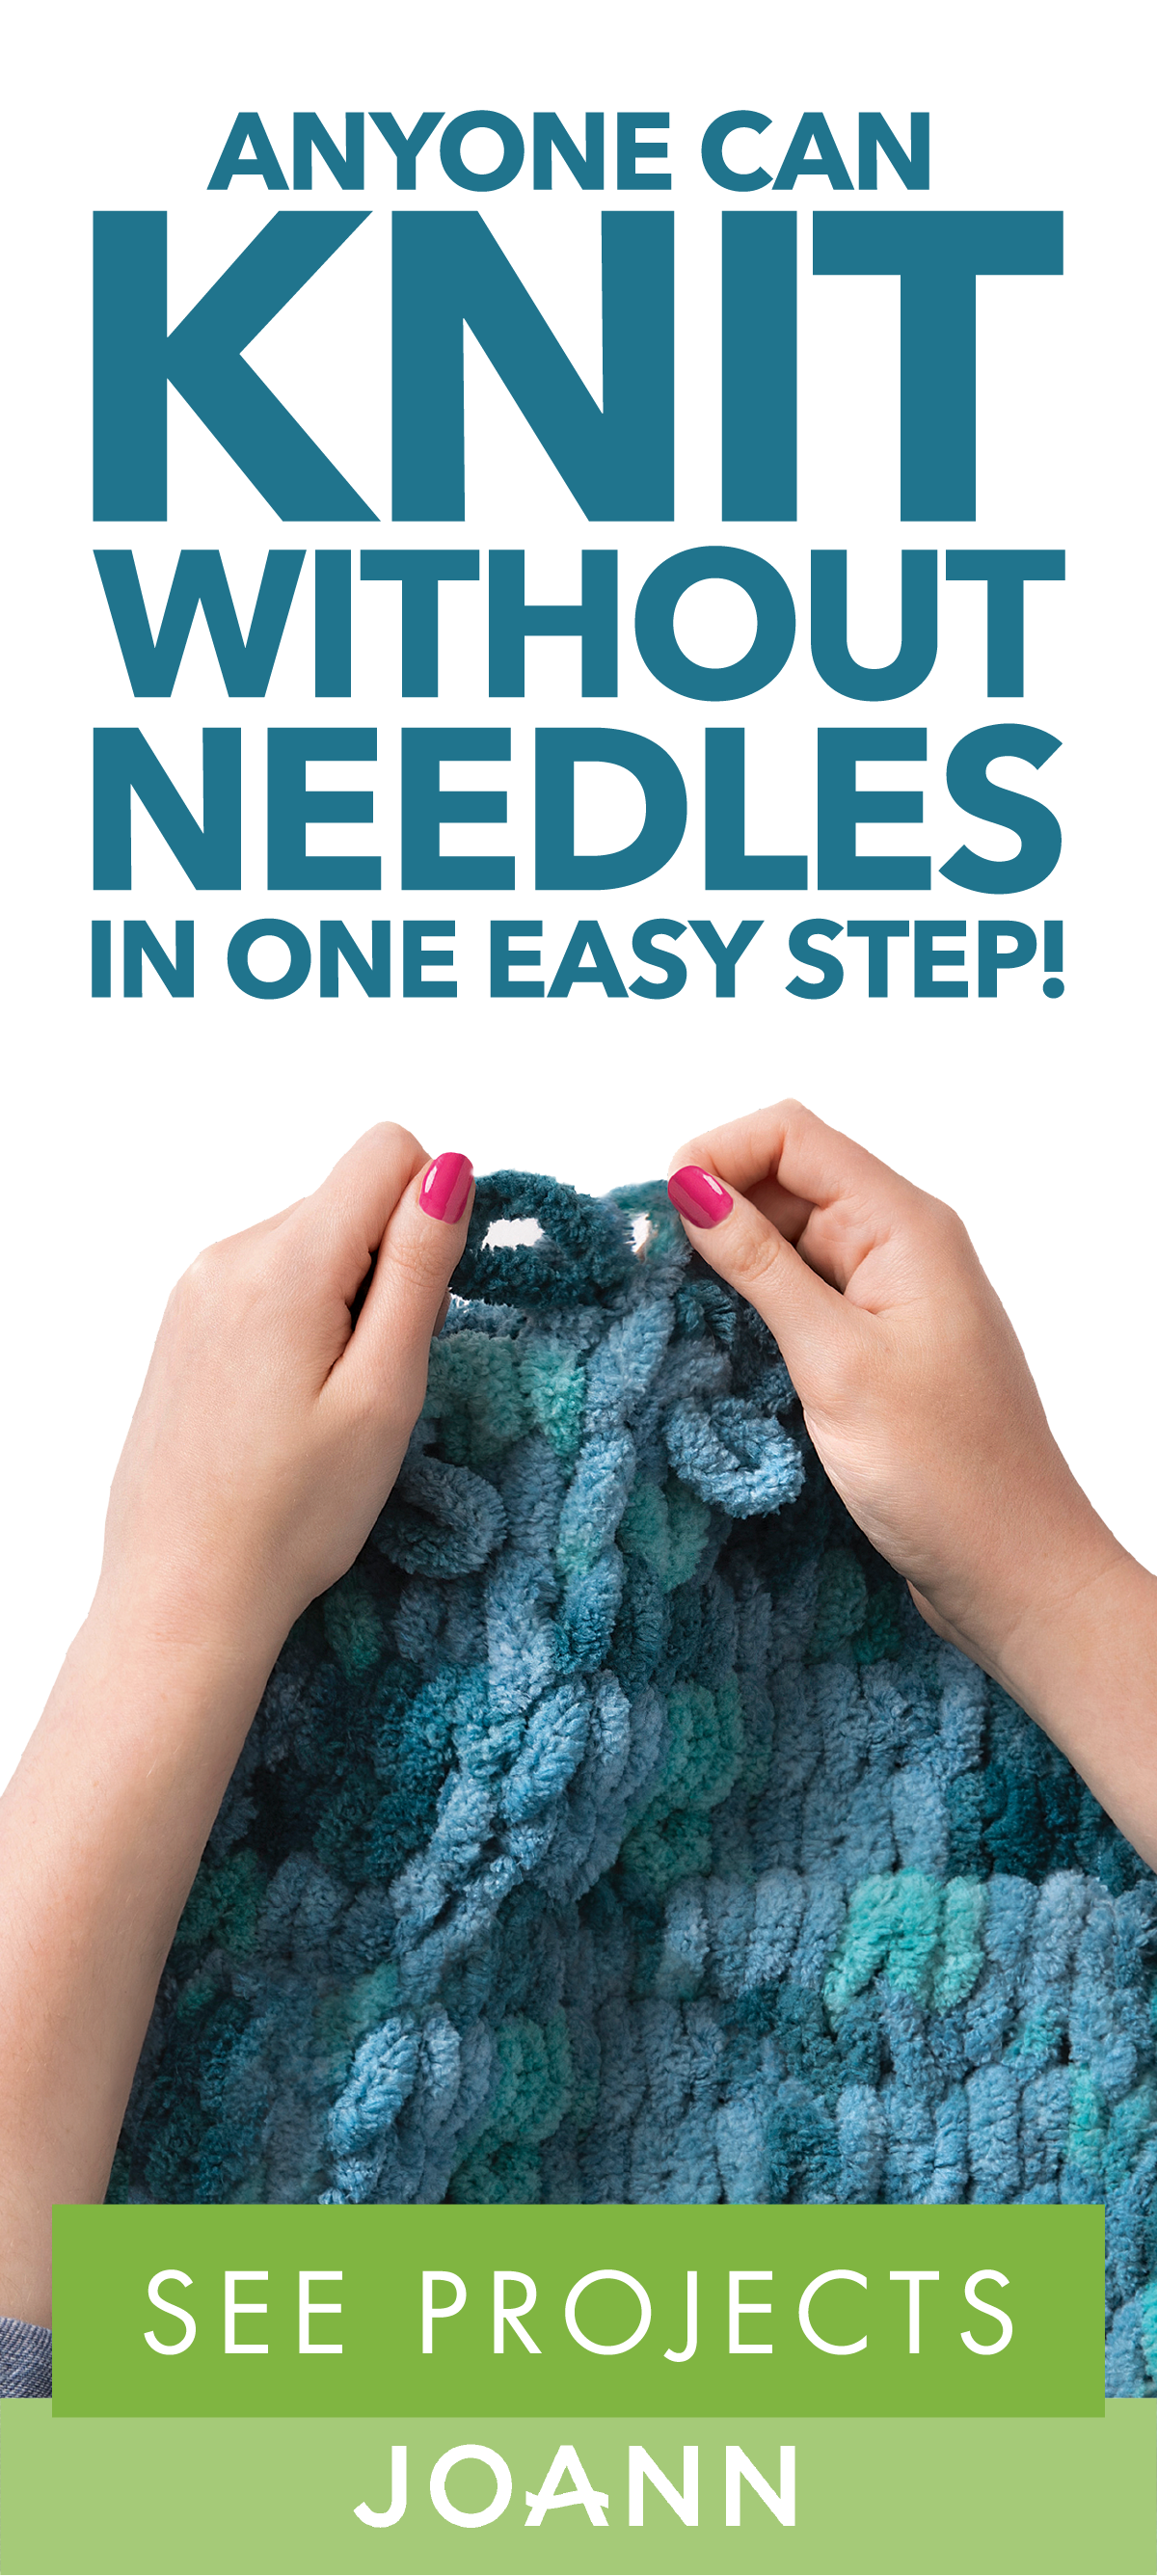 Who doesn't love a creative project?! Check out these beginner-friendly tutorials from JOANN to learn how you can knit without needles in one easy step. Learning a new technique is a fun way to expand your love of knitting in a whole new way. -   22 diy projects For College summer
 ideas